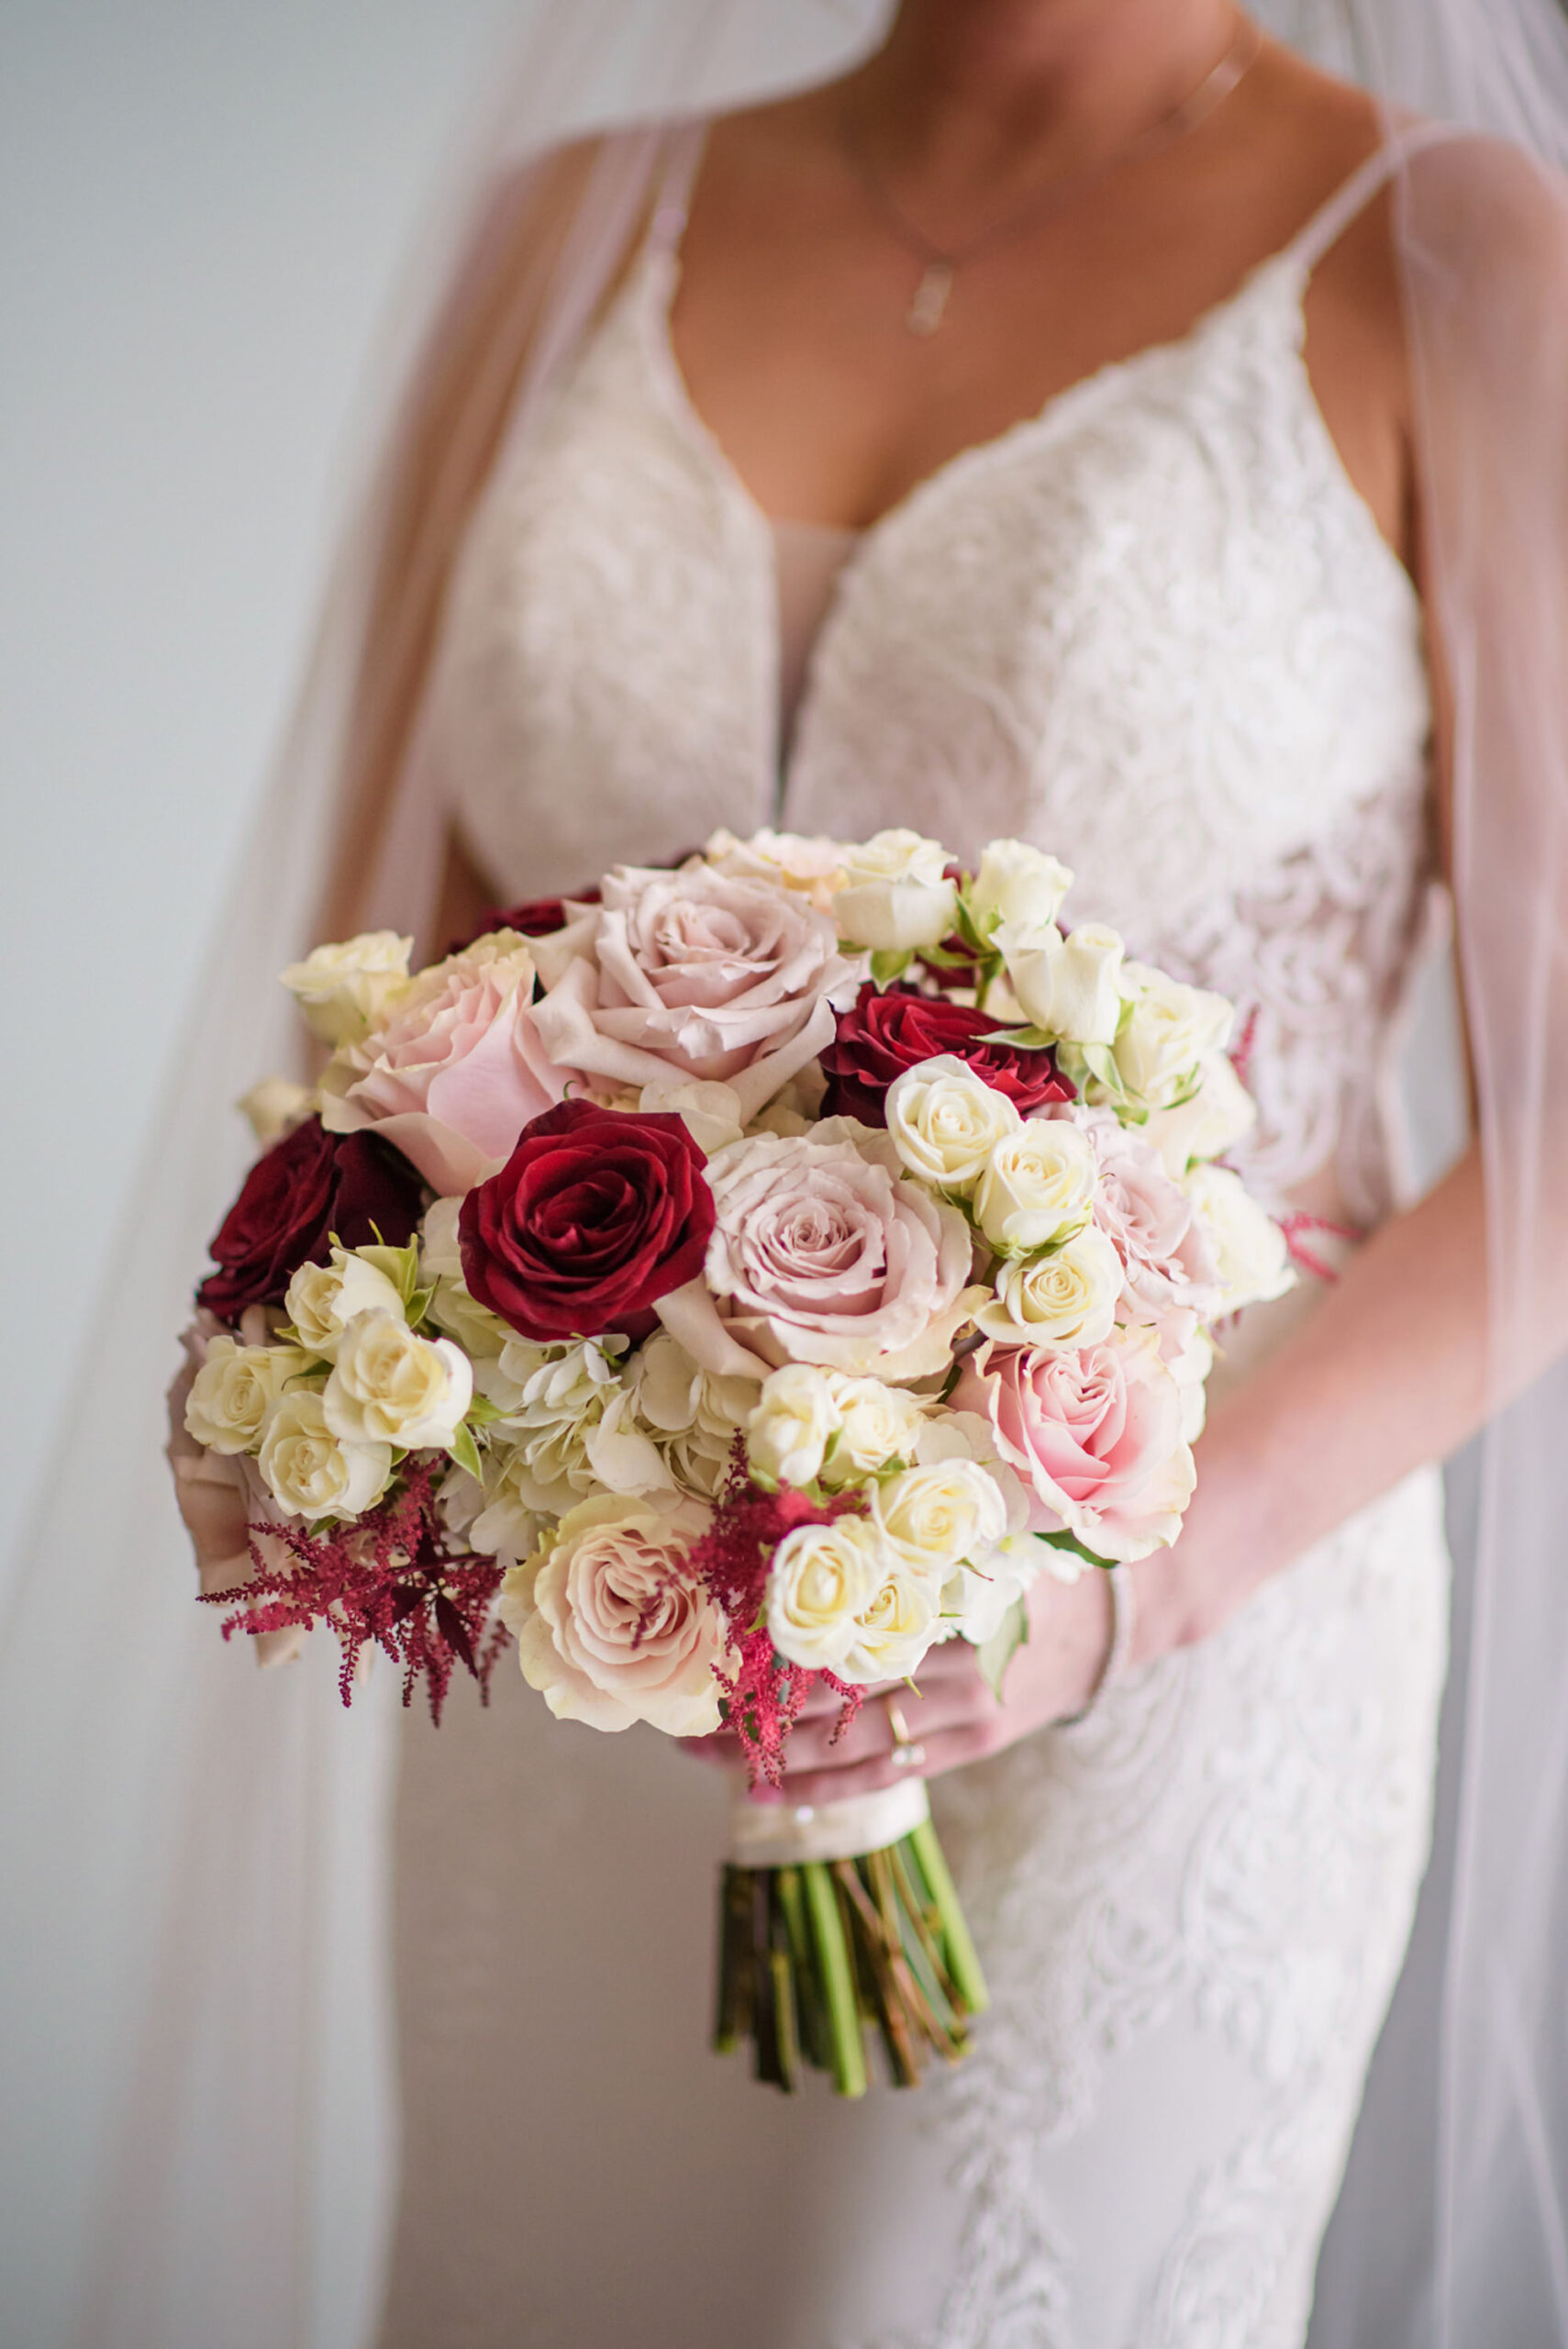 Classic Burgundy, White, and Pink Rose Wedding Bouquet Inspiration